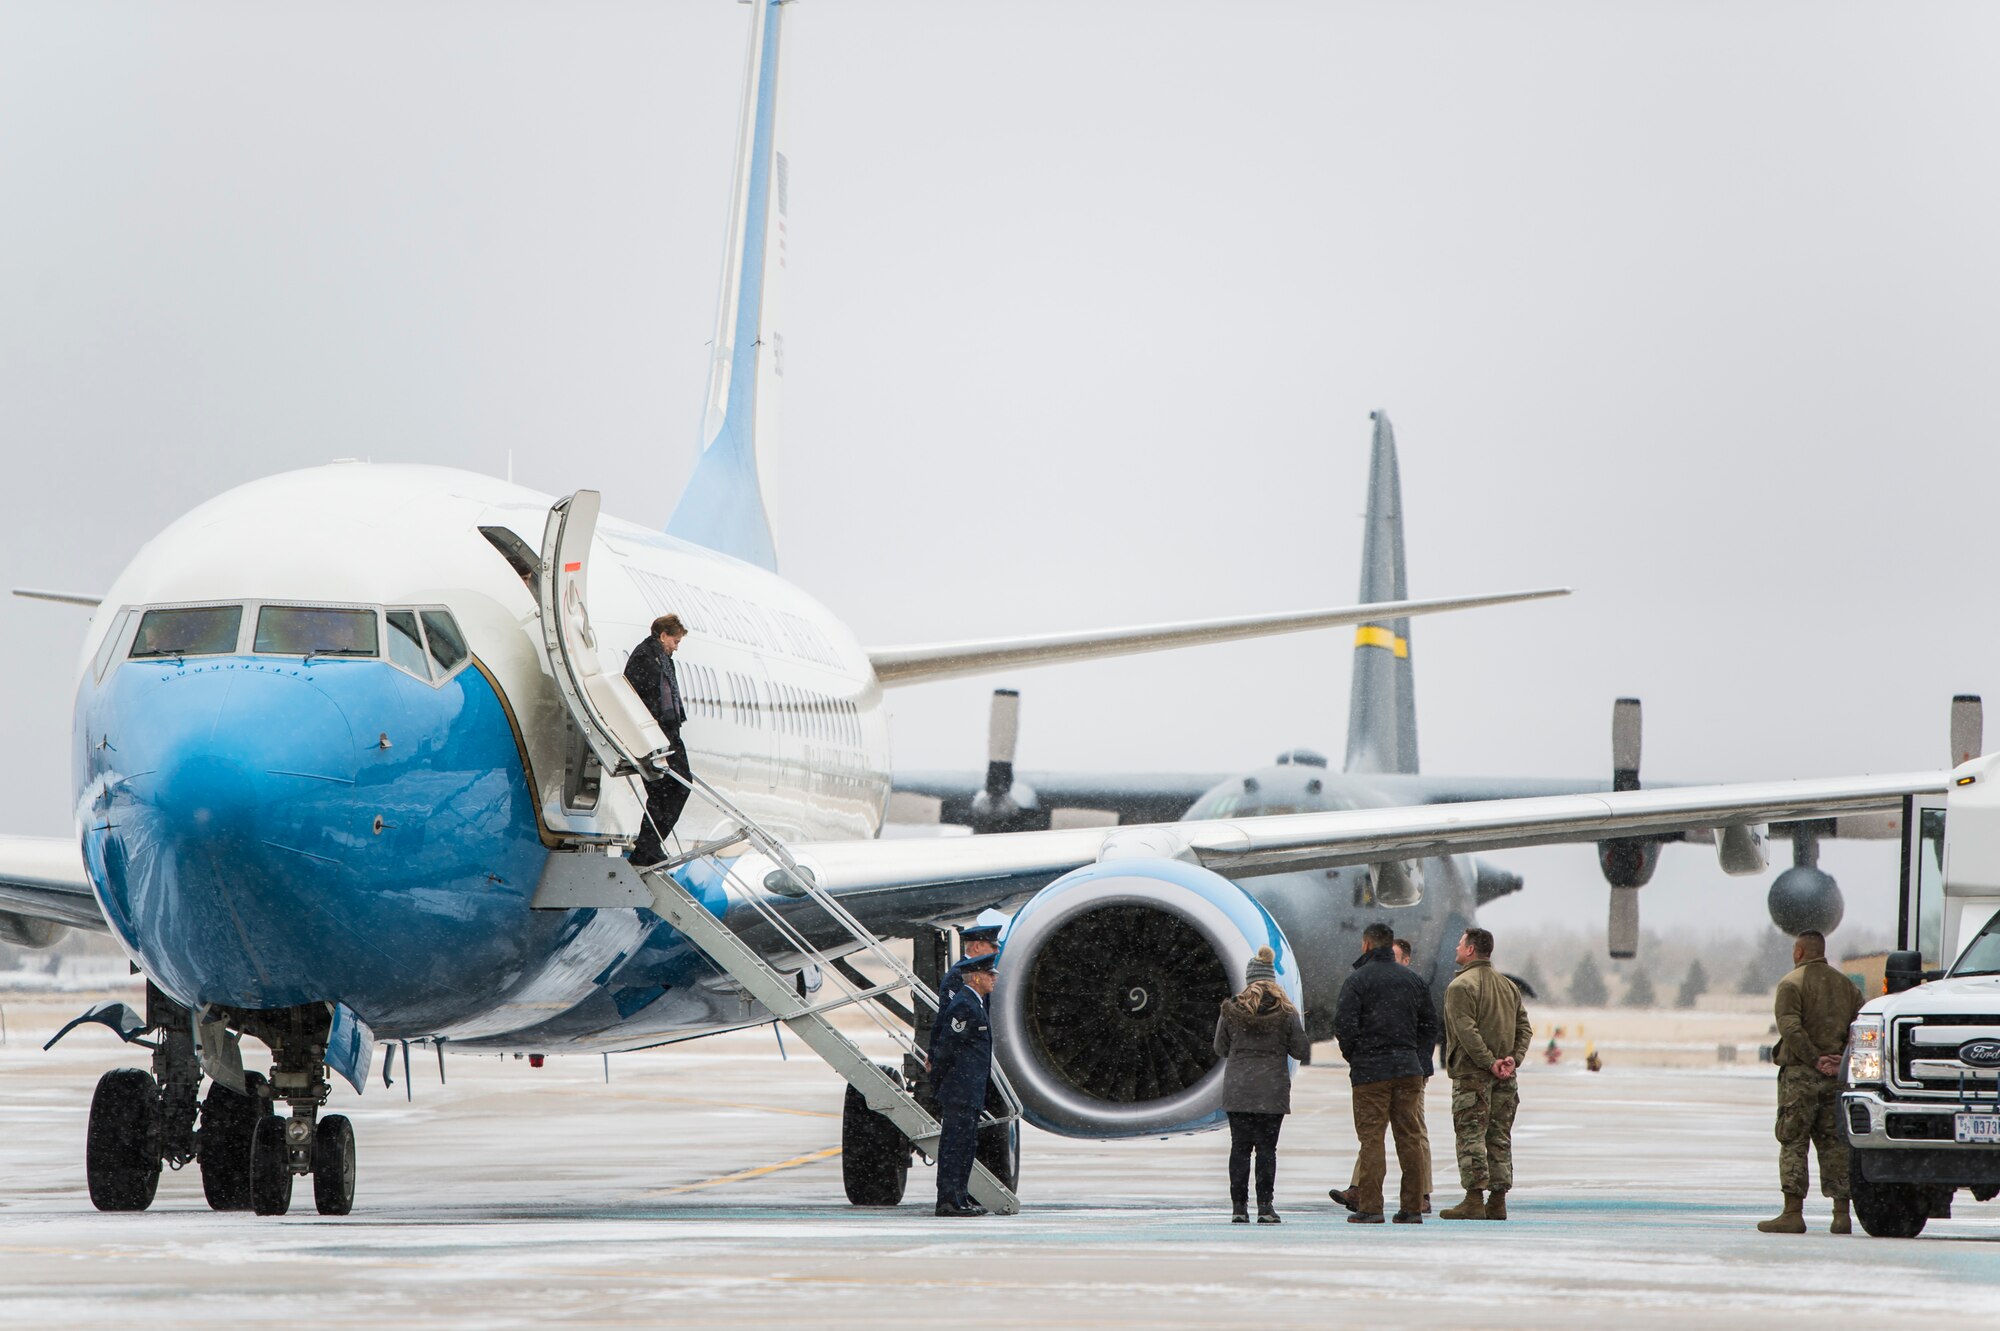 The Secretary of the Air Force Barbara Barrett arrives at the 153d Airlift Wing, Wyoming Air National Guard Base, Cheyenne, Wyo., Oct. 27, 2019. This visit marks Barrett's first official stop since becoming the 25th Secretary of the Air Force. During her visit, Barrett toured F.E. Warren Air Force Base to emphasize the importance of the 90th Missile Wing’s mission.